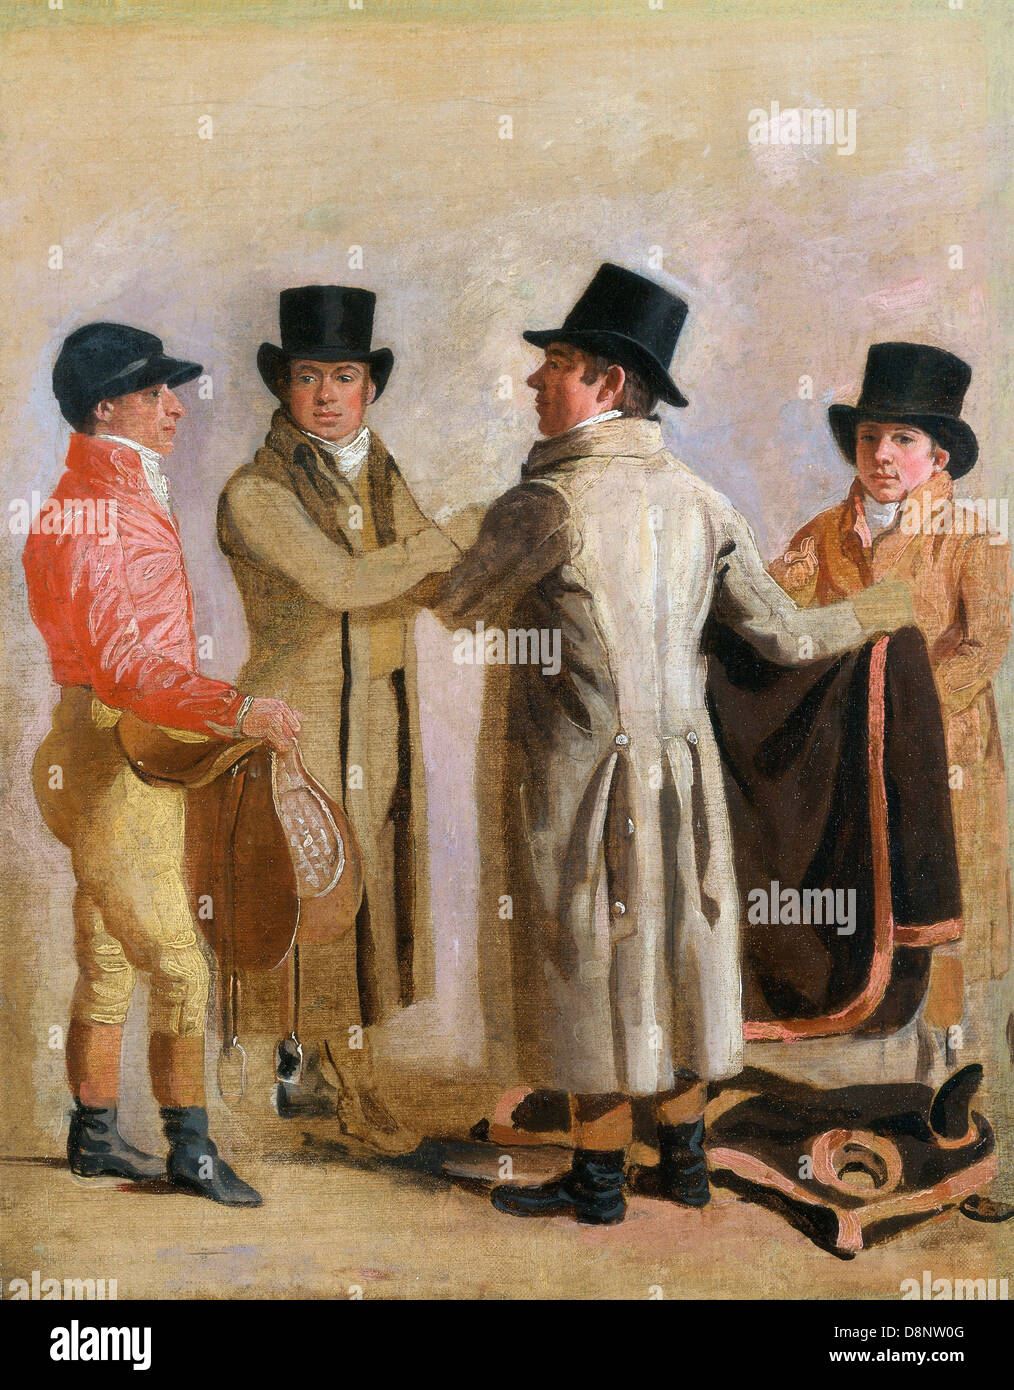 Benjamin Marshall, The Jockey Frank Buckle, the Owner-Breeder John Wastell, his Trainer Robert Robson, and a Stable-lad 1802 Stock Photo